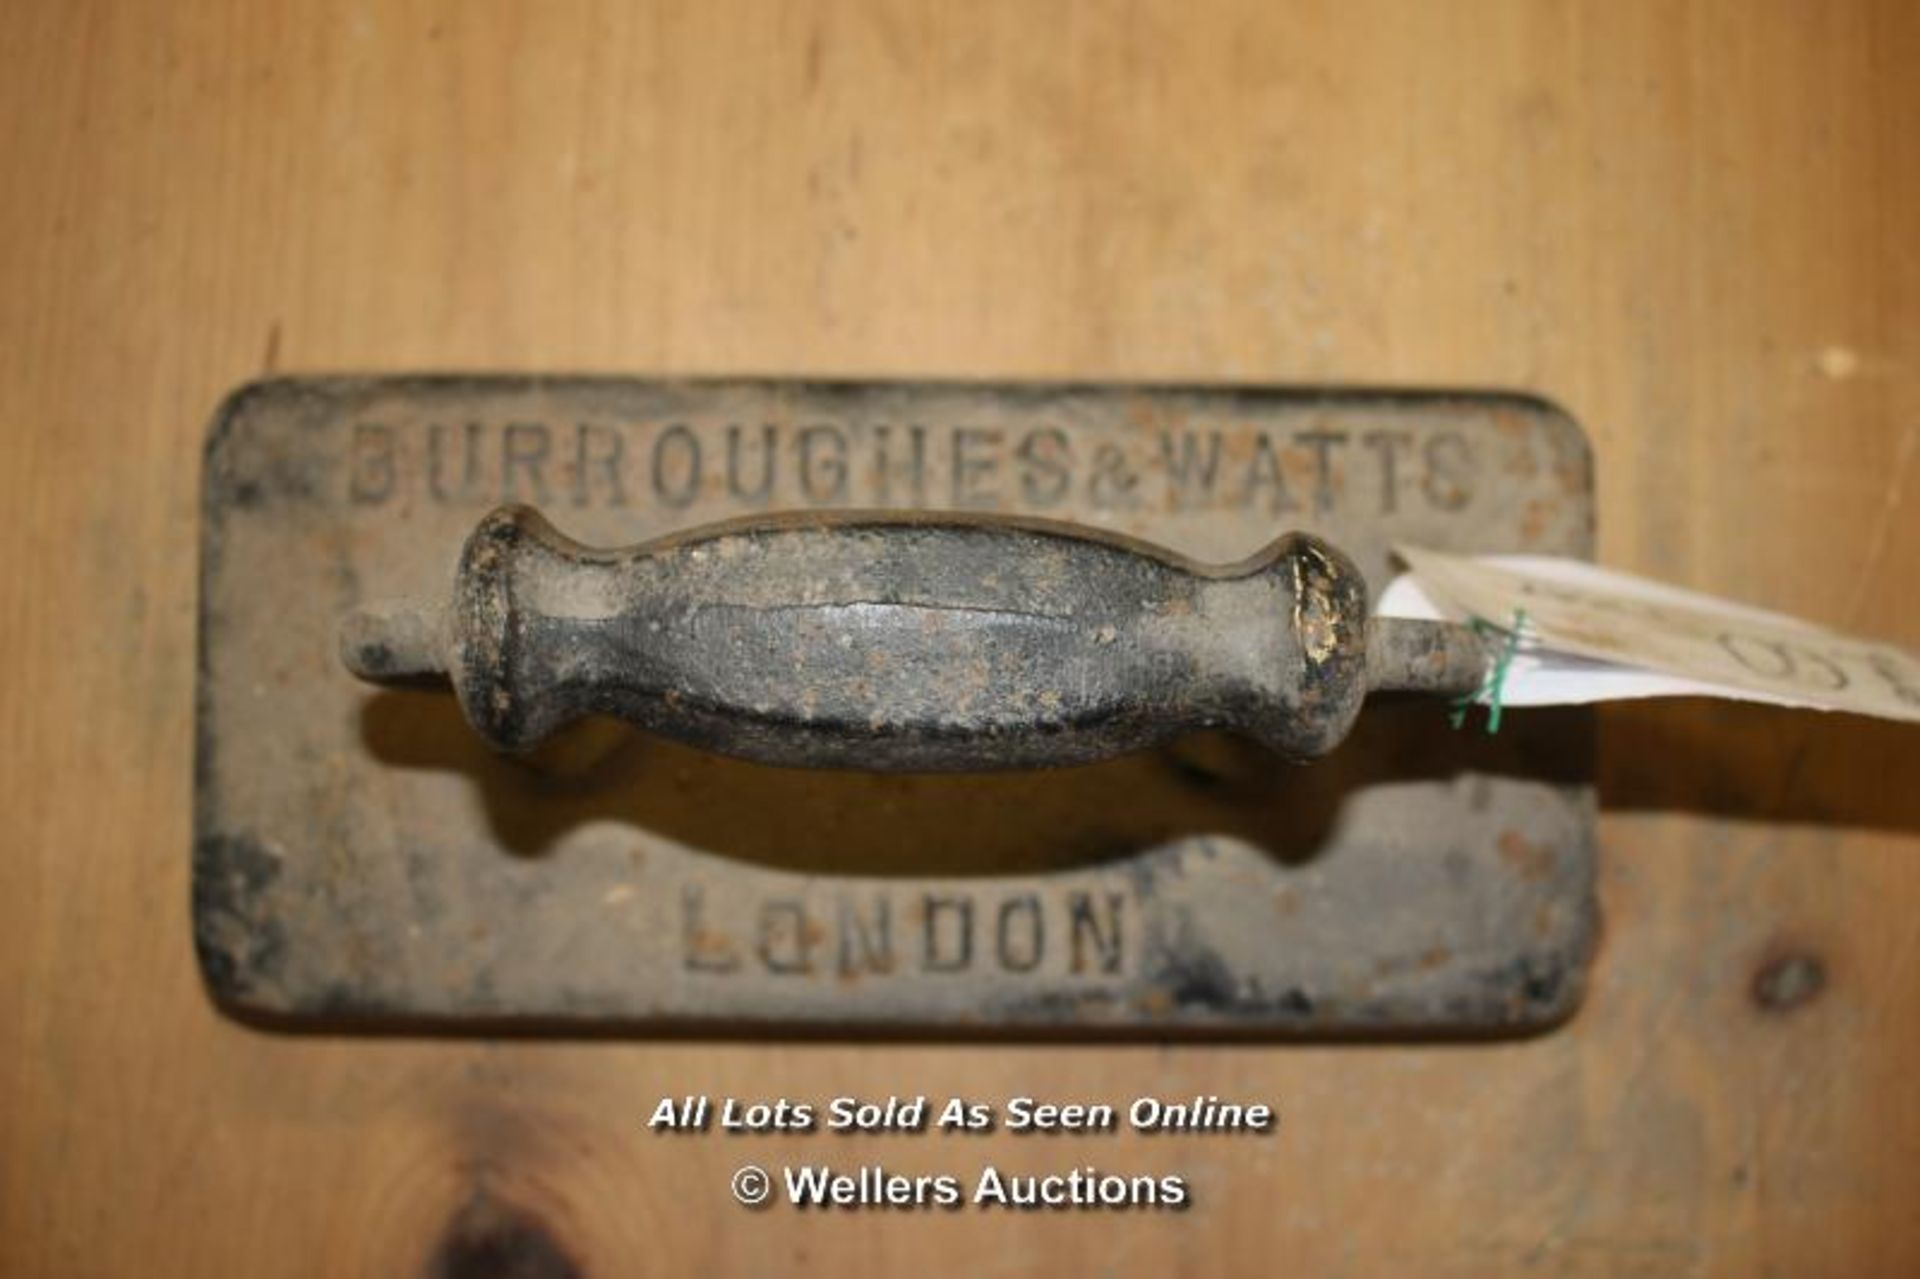 *BURROUGHES AND WATTS OF LONDON CAST IRON BILLIARD TABLE IRON - Image 2 of 2